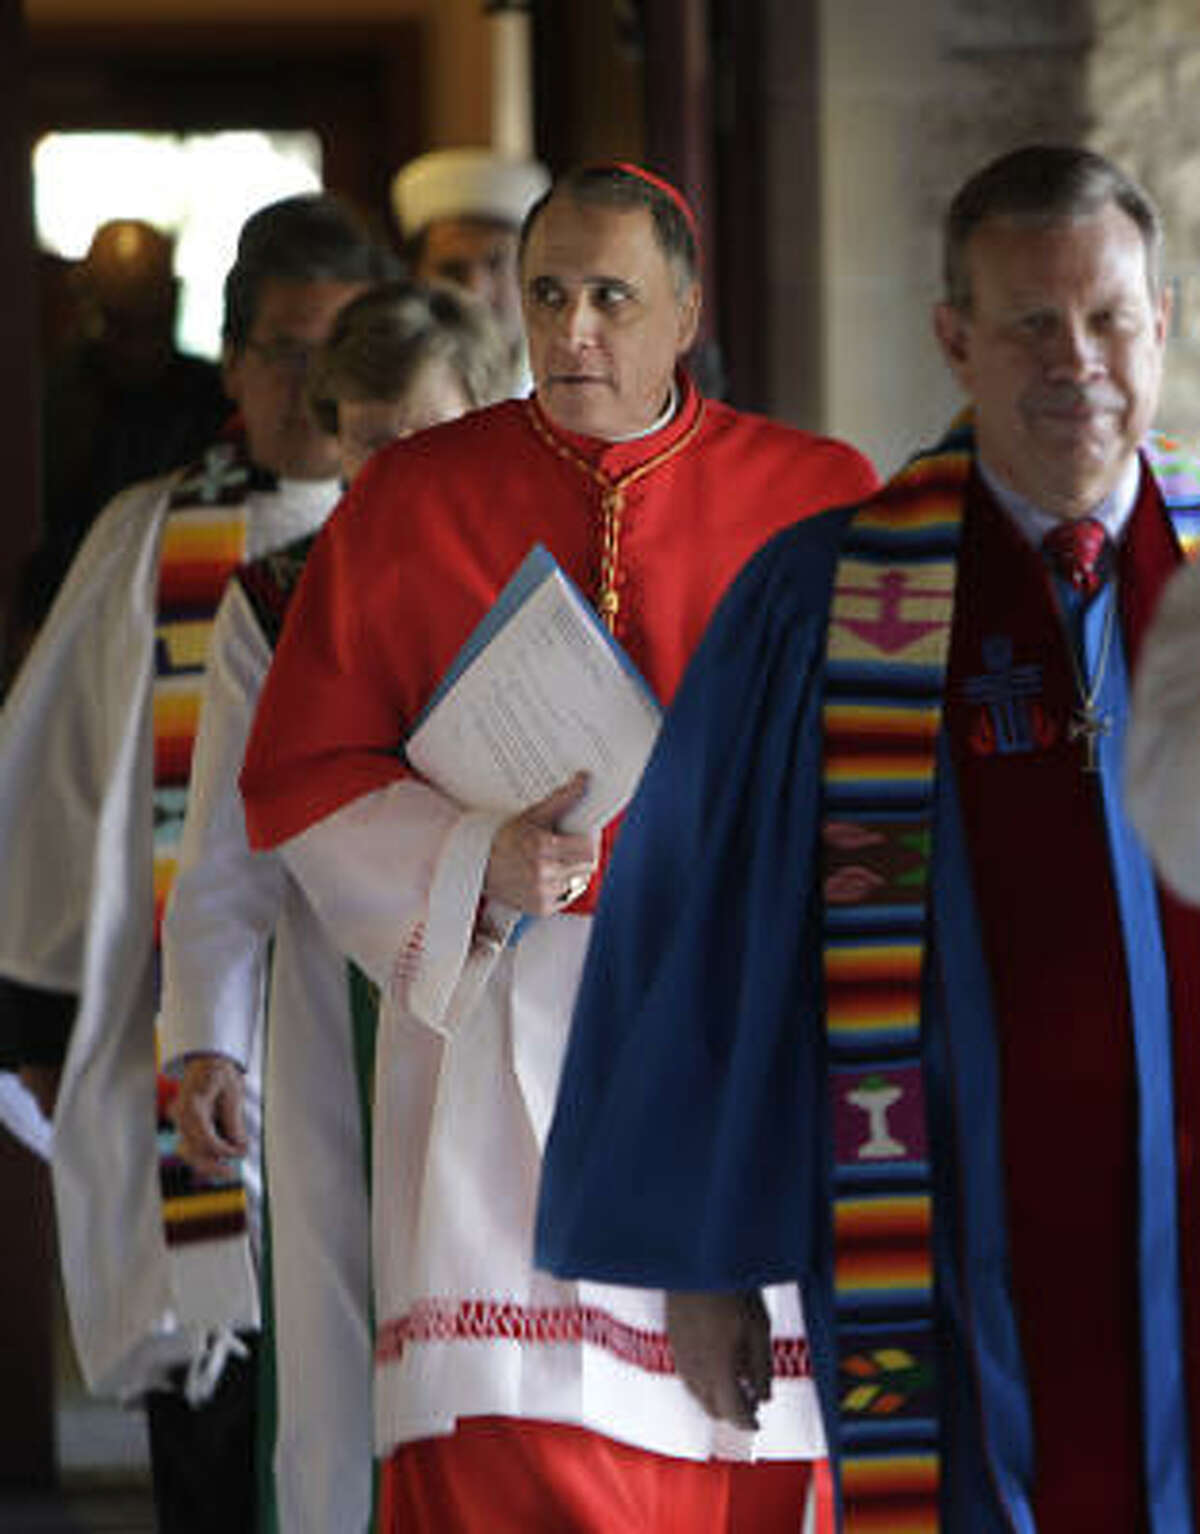 Cardinal Daniel DiNardo, carrying papers, was among the local religious leaders attending an interfaith prayer service to renew a call for immigration reform.